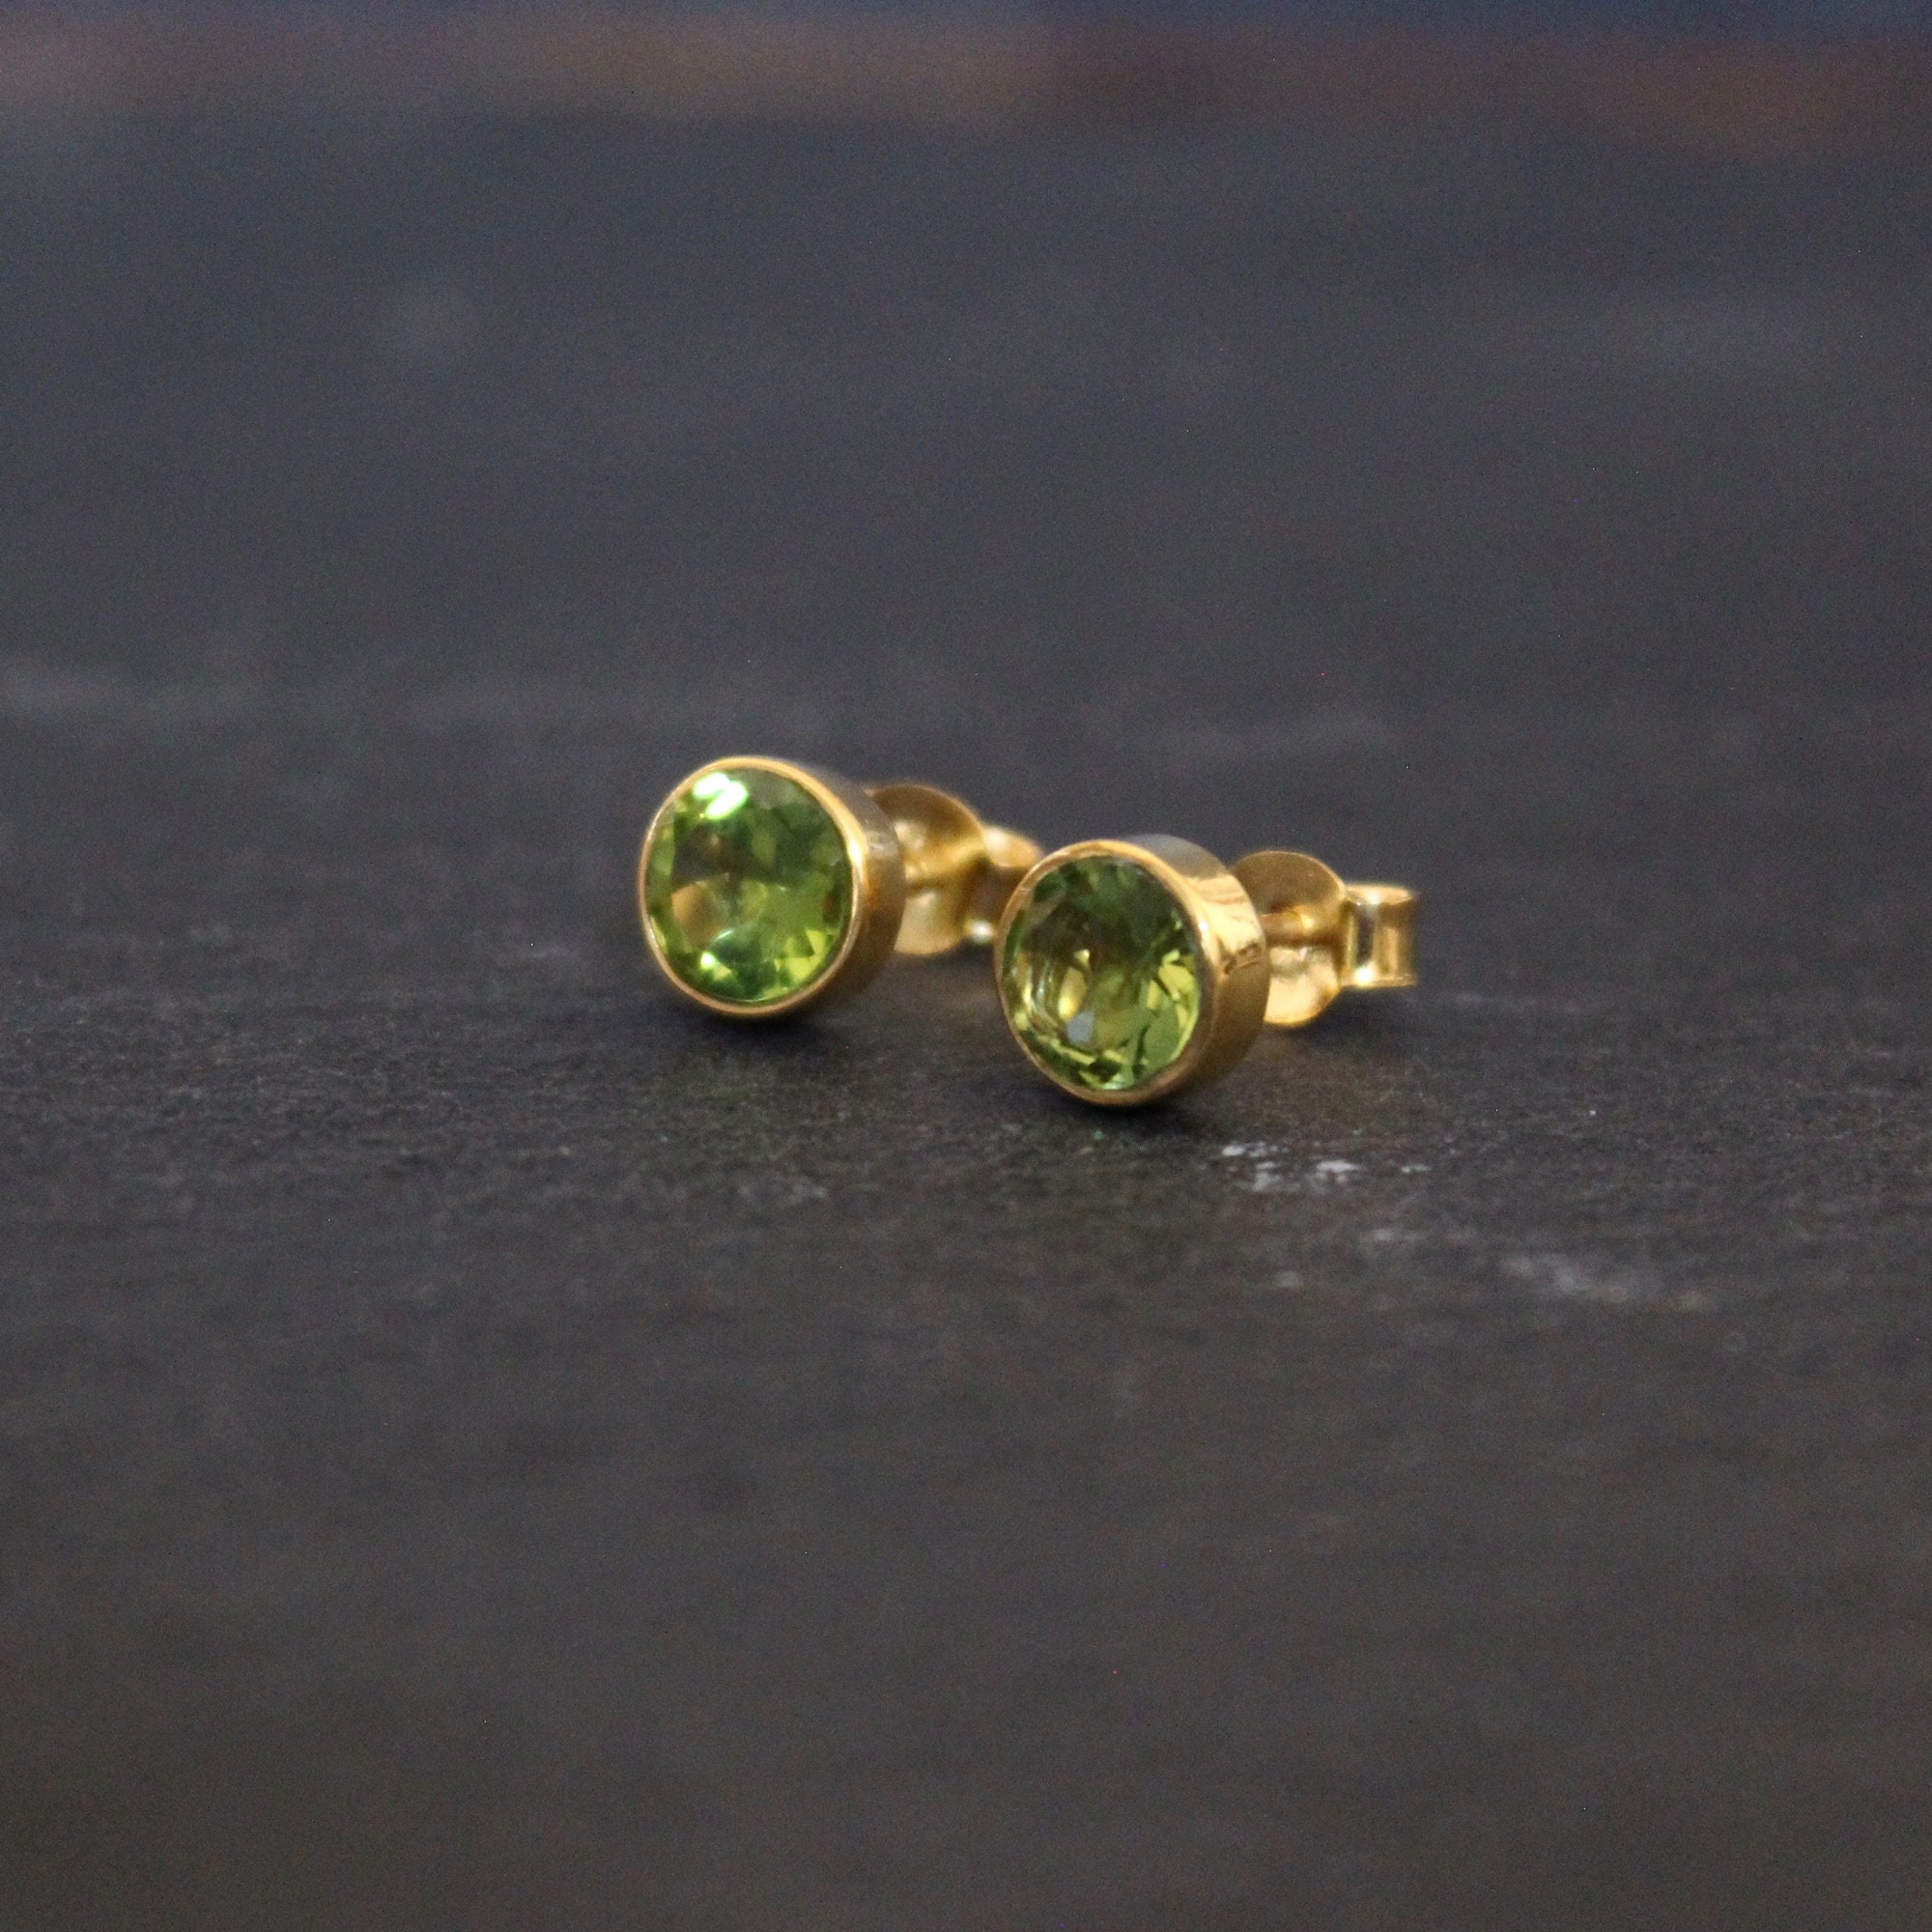 4mm Synthetic Peridot Screw Back Stud Earrings in 14k Yellow Gold - The  Black Bow Jewelry Company